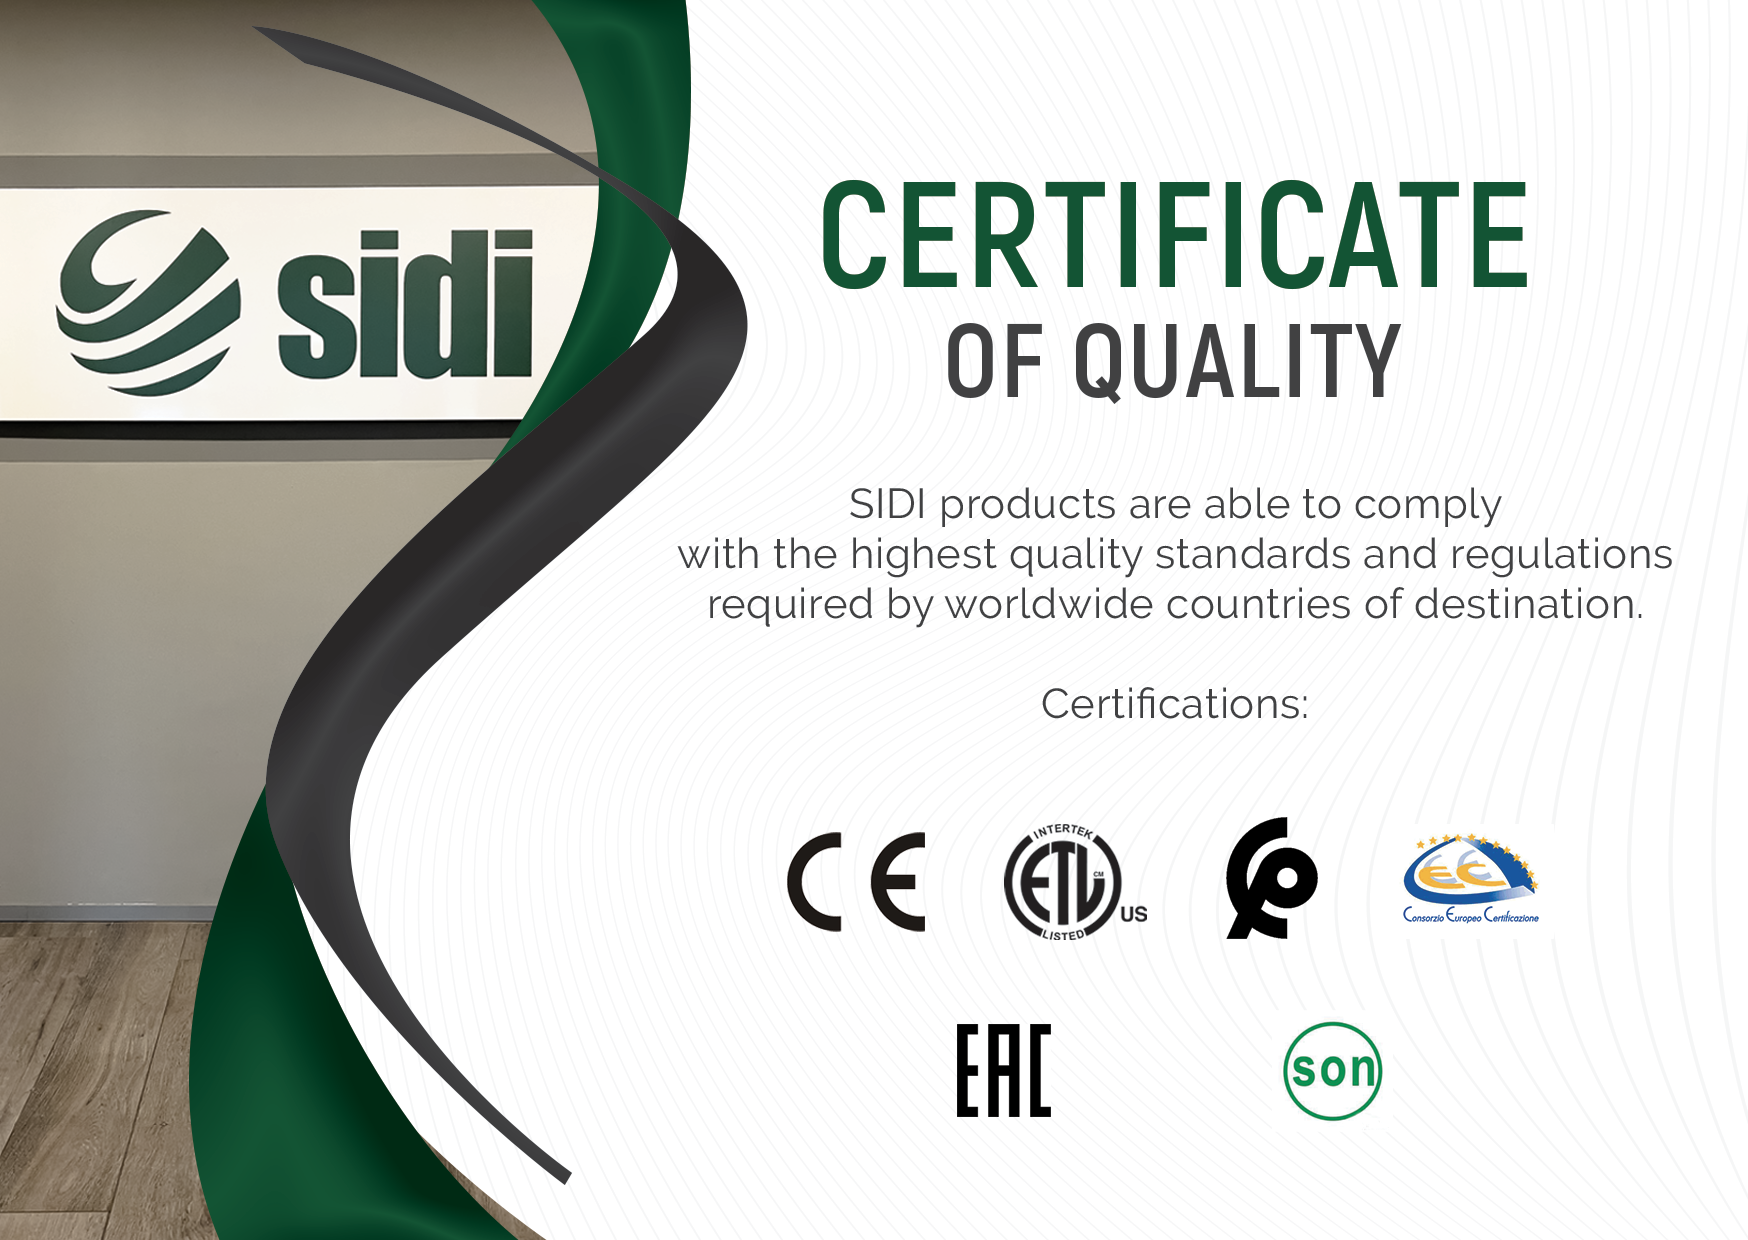 OUR CERTIFICATIONS